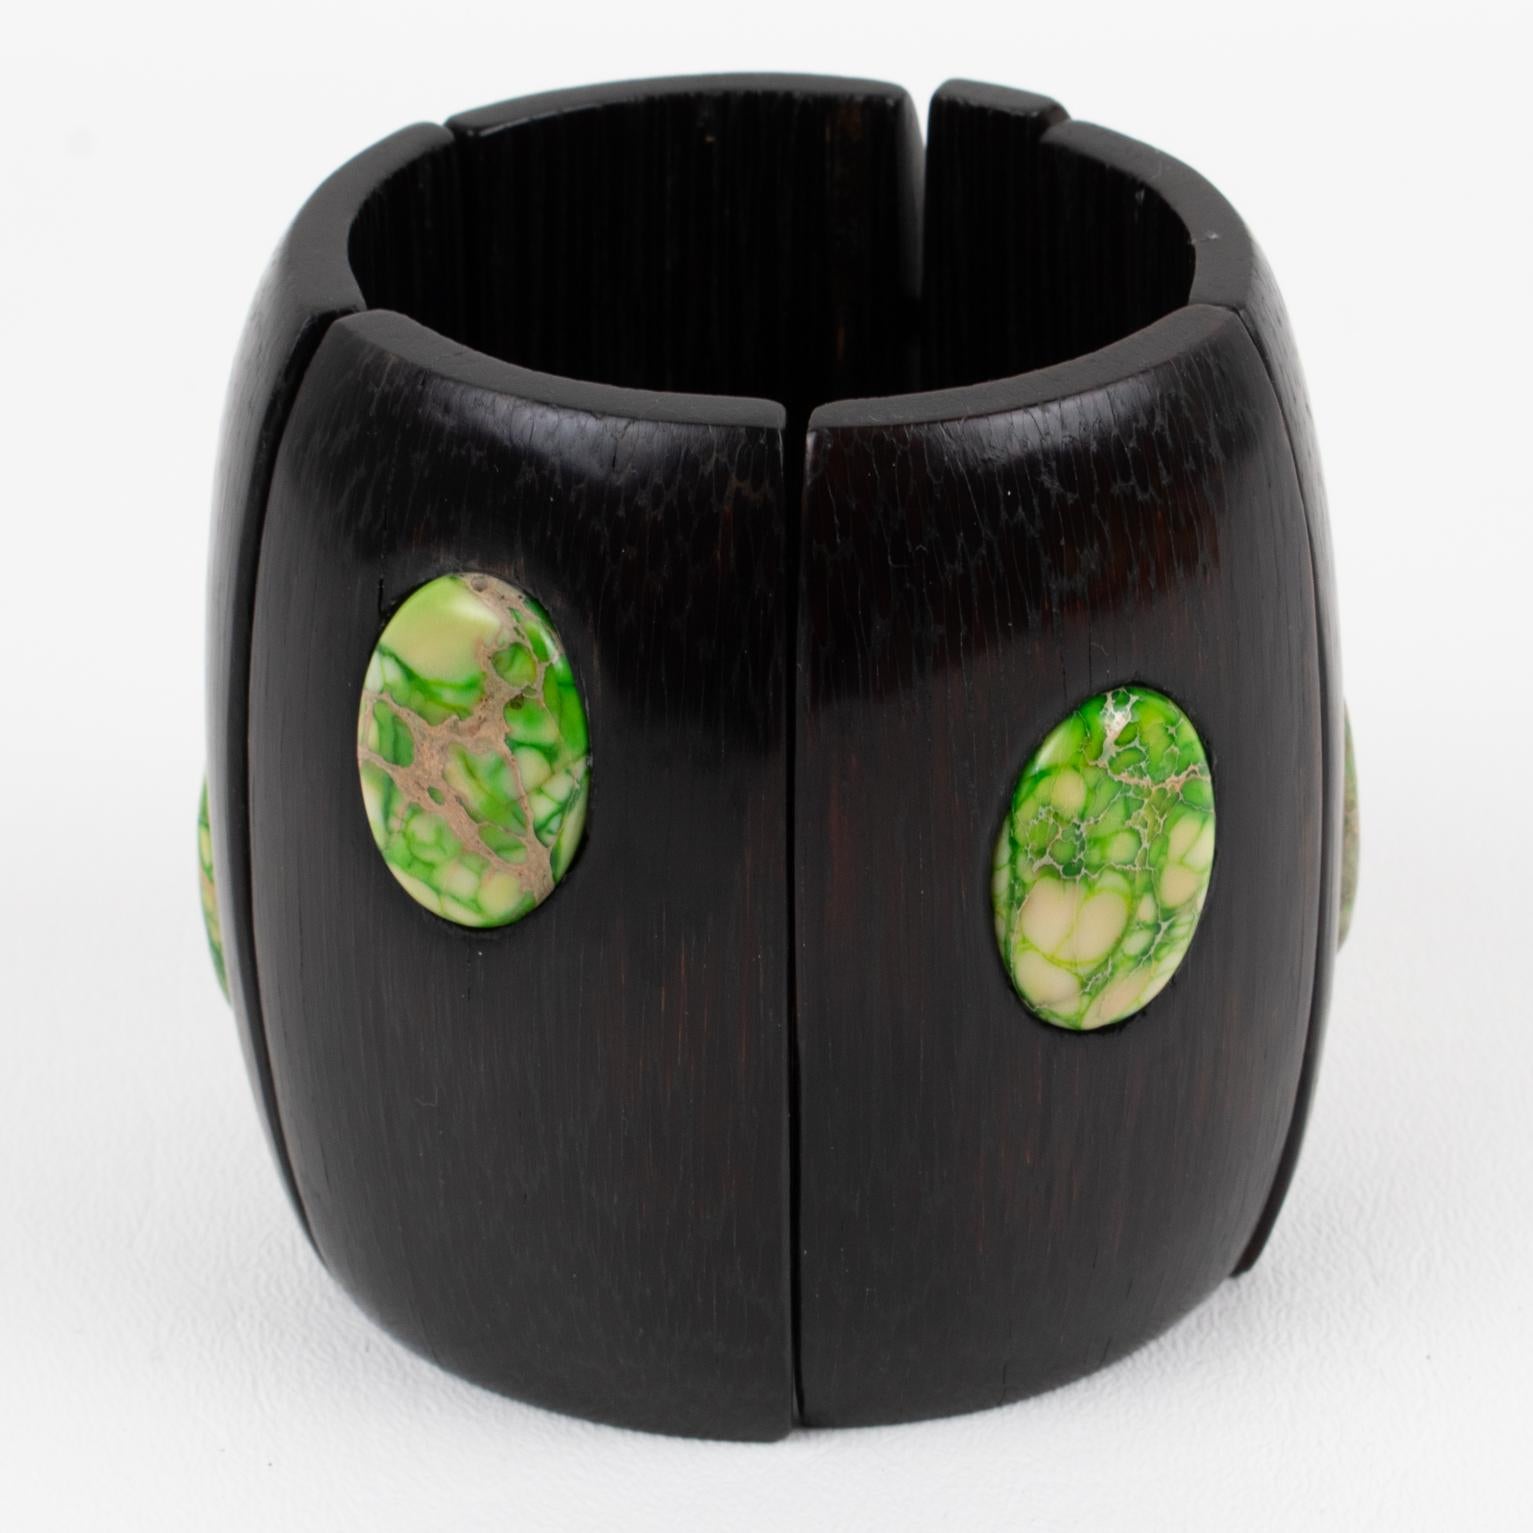 Gerda Lyngaard for Monies designed this gorgeous oversized ebony wood stretch bracelet. The chunky hand-crafted stretch bangle shape is in Ebony wood with polished green moss stone cabochons. This stunning piece with an organic and ethnic flair that